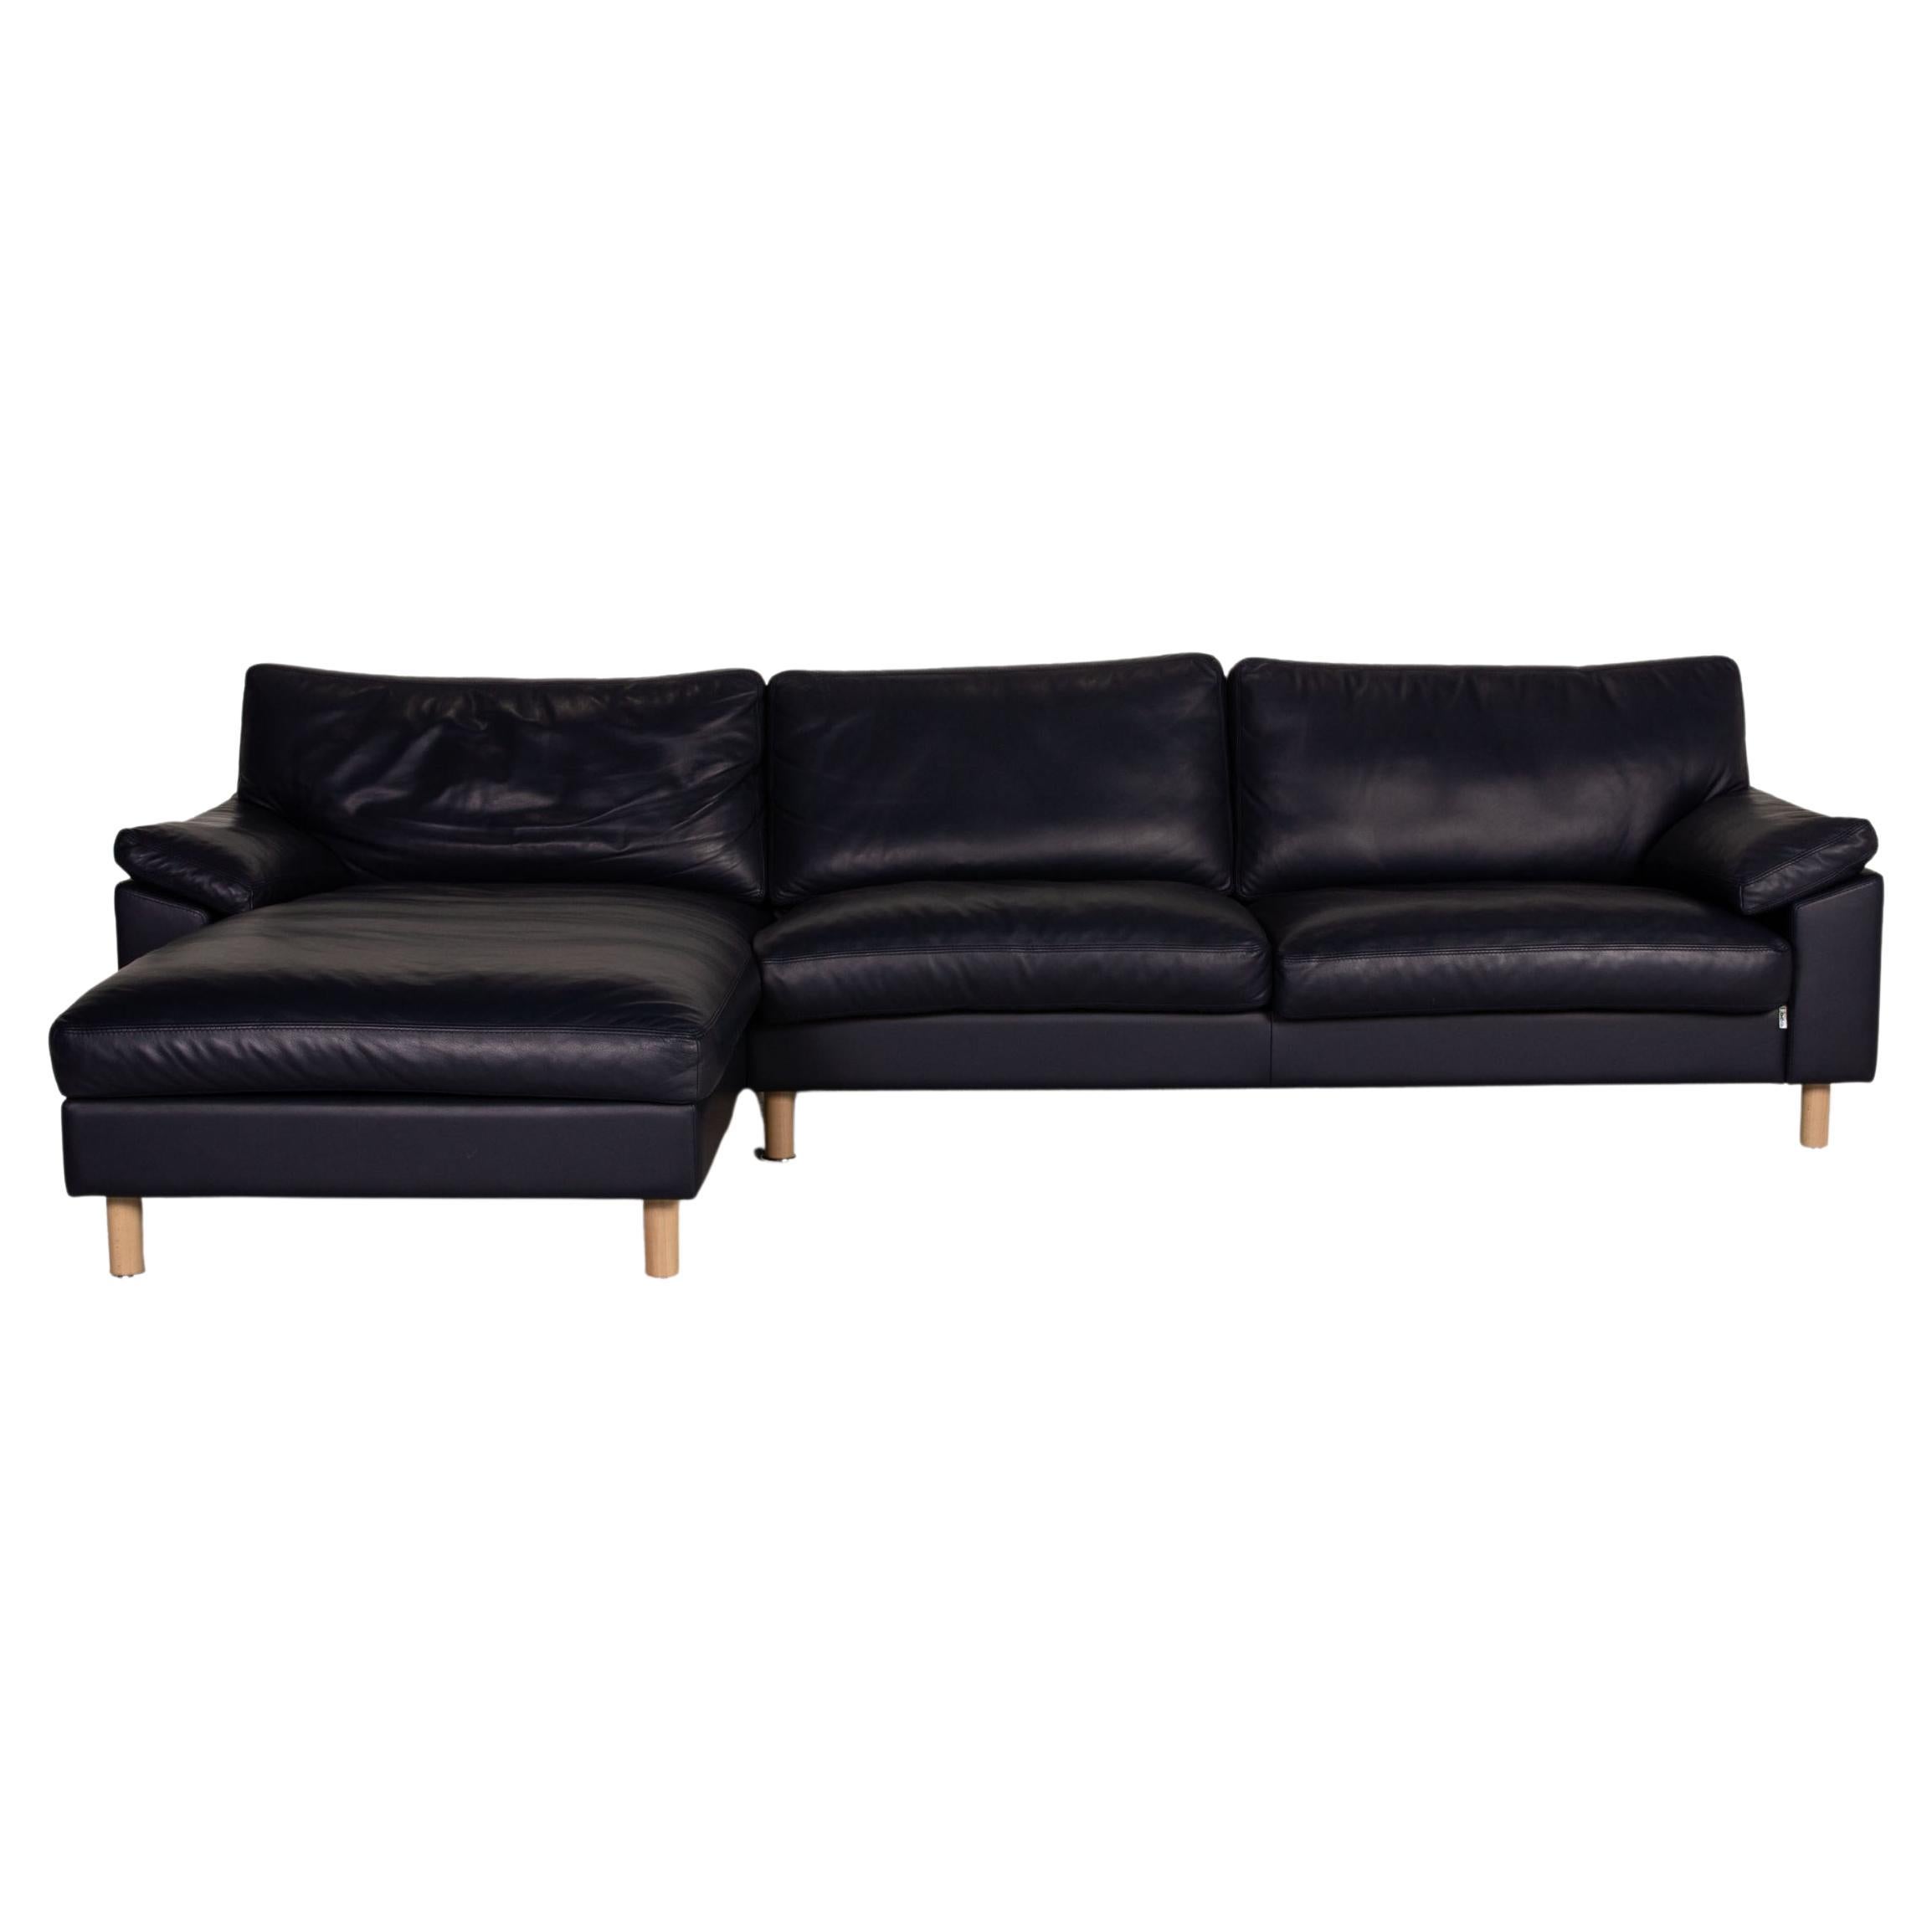 Erpo CL 650 Leather Sofa Blue Corner Sofa Couch For Sale